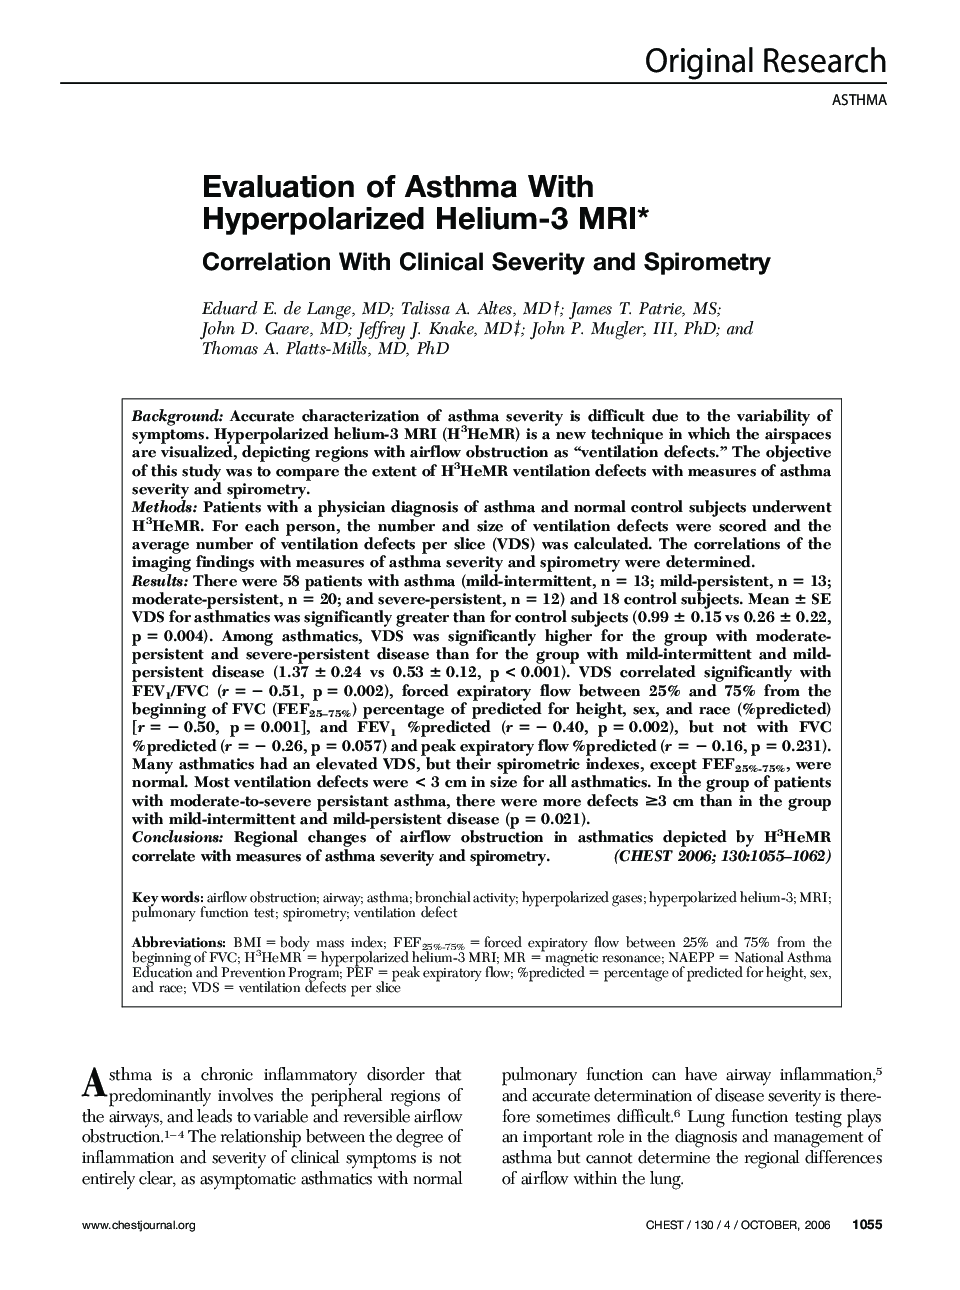 Evaluation of Asthma With Hyperpolarized Helium-3 MRI